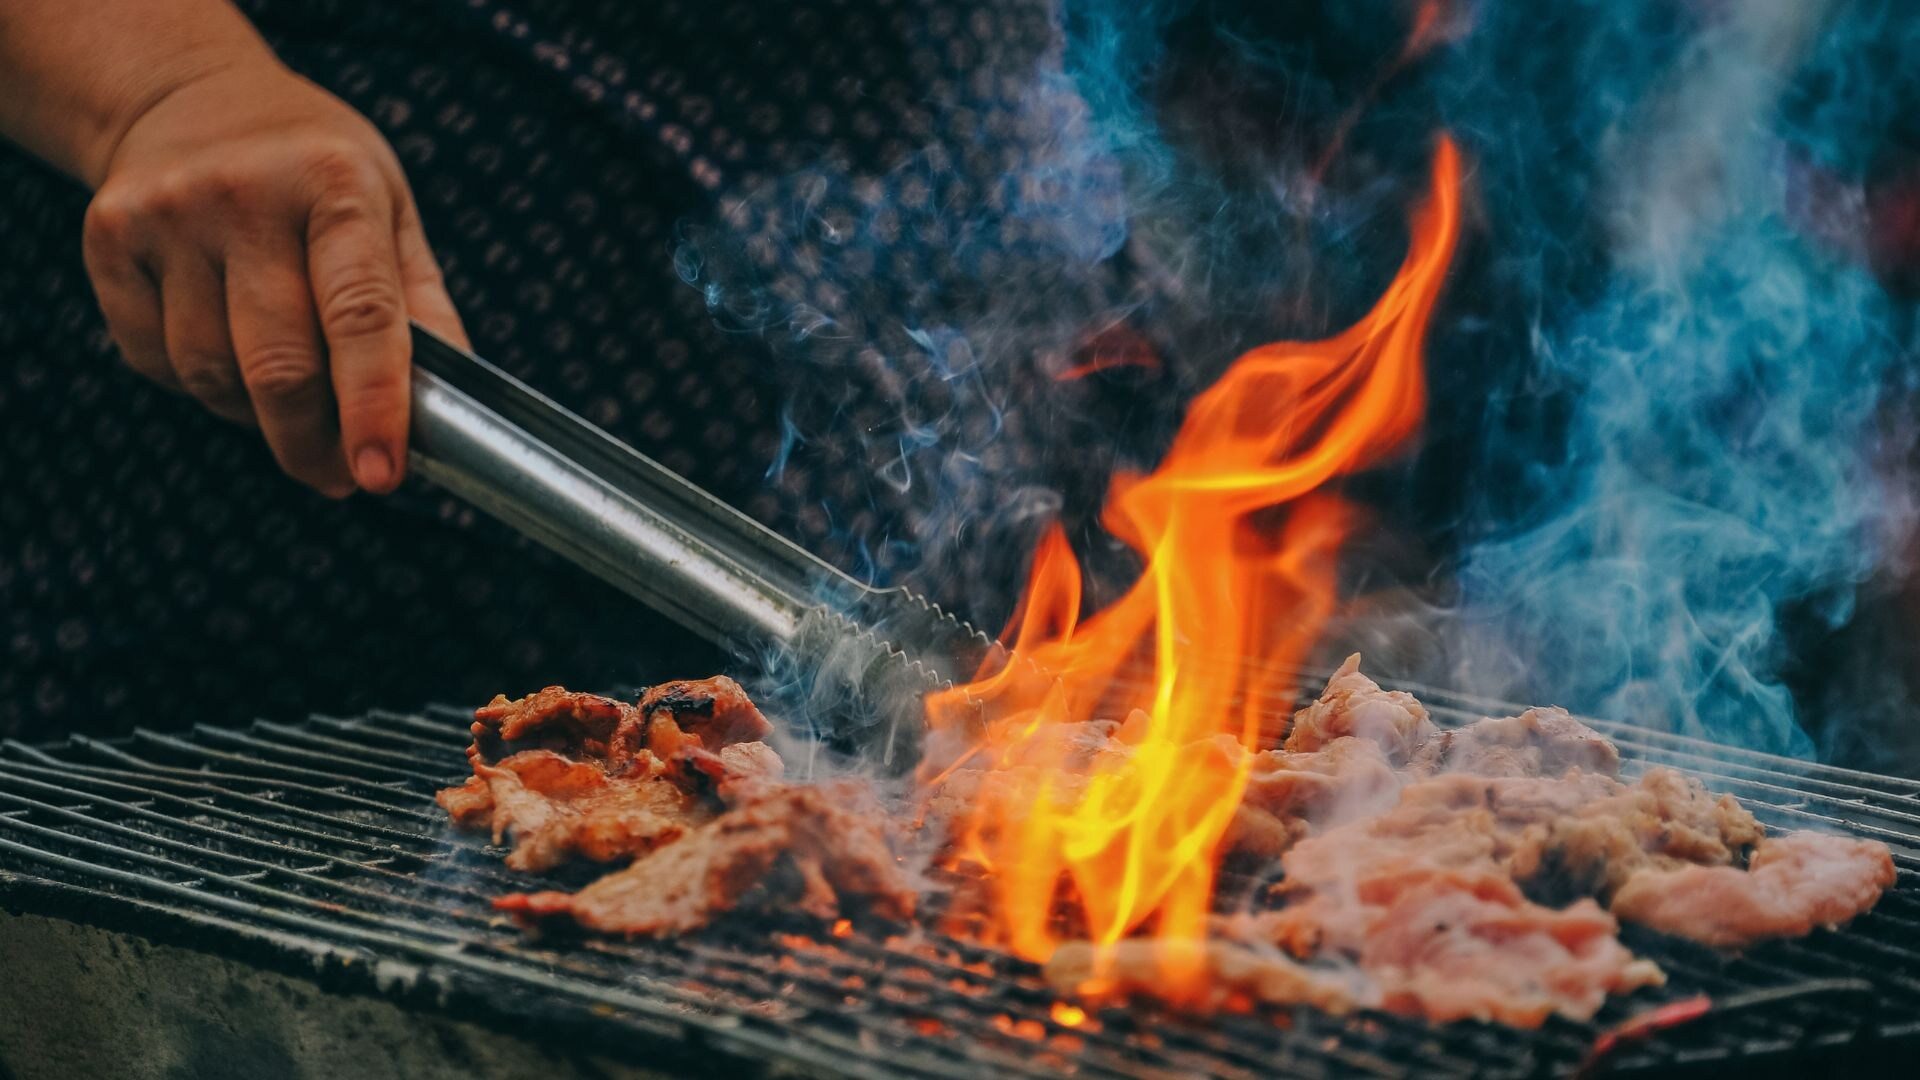 Doctors are sounding the alarm.  Barbecues often end up in the hospital emergency room